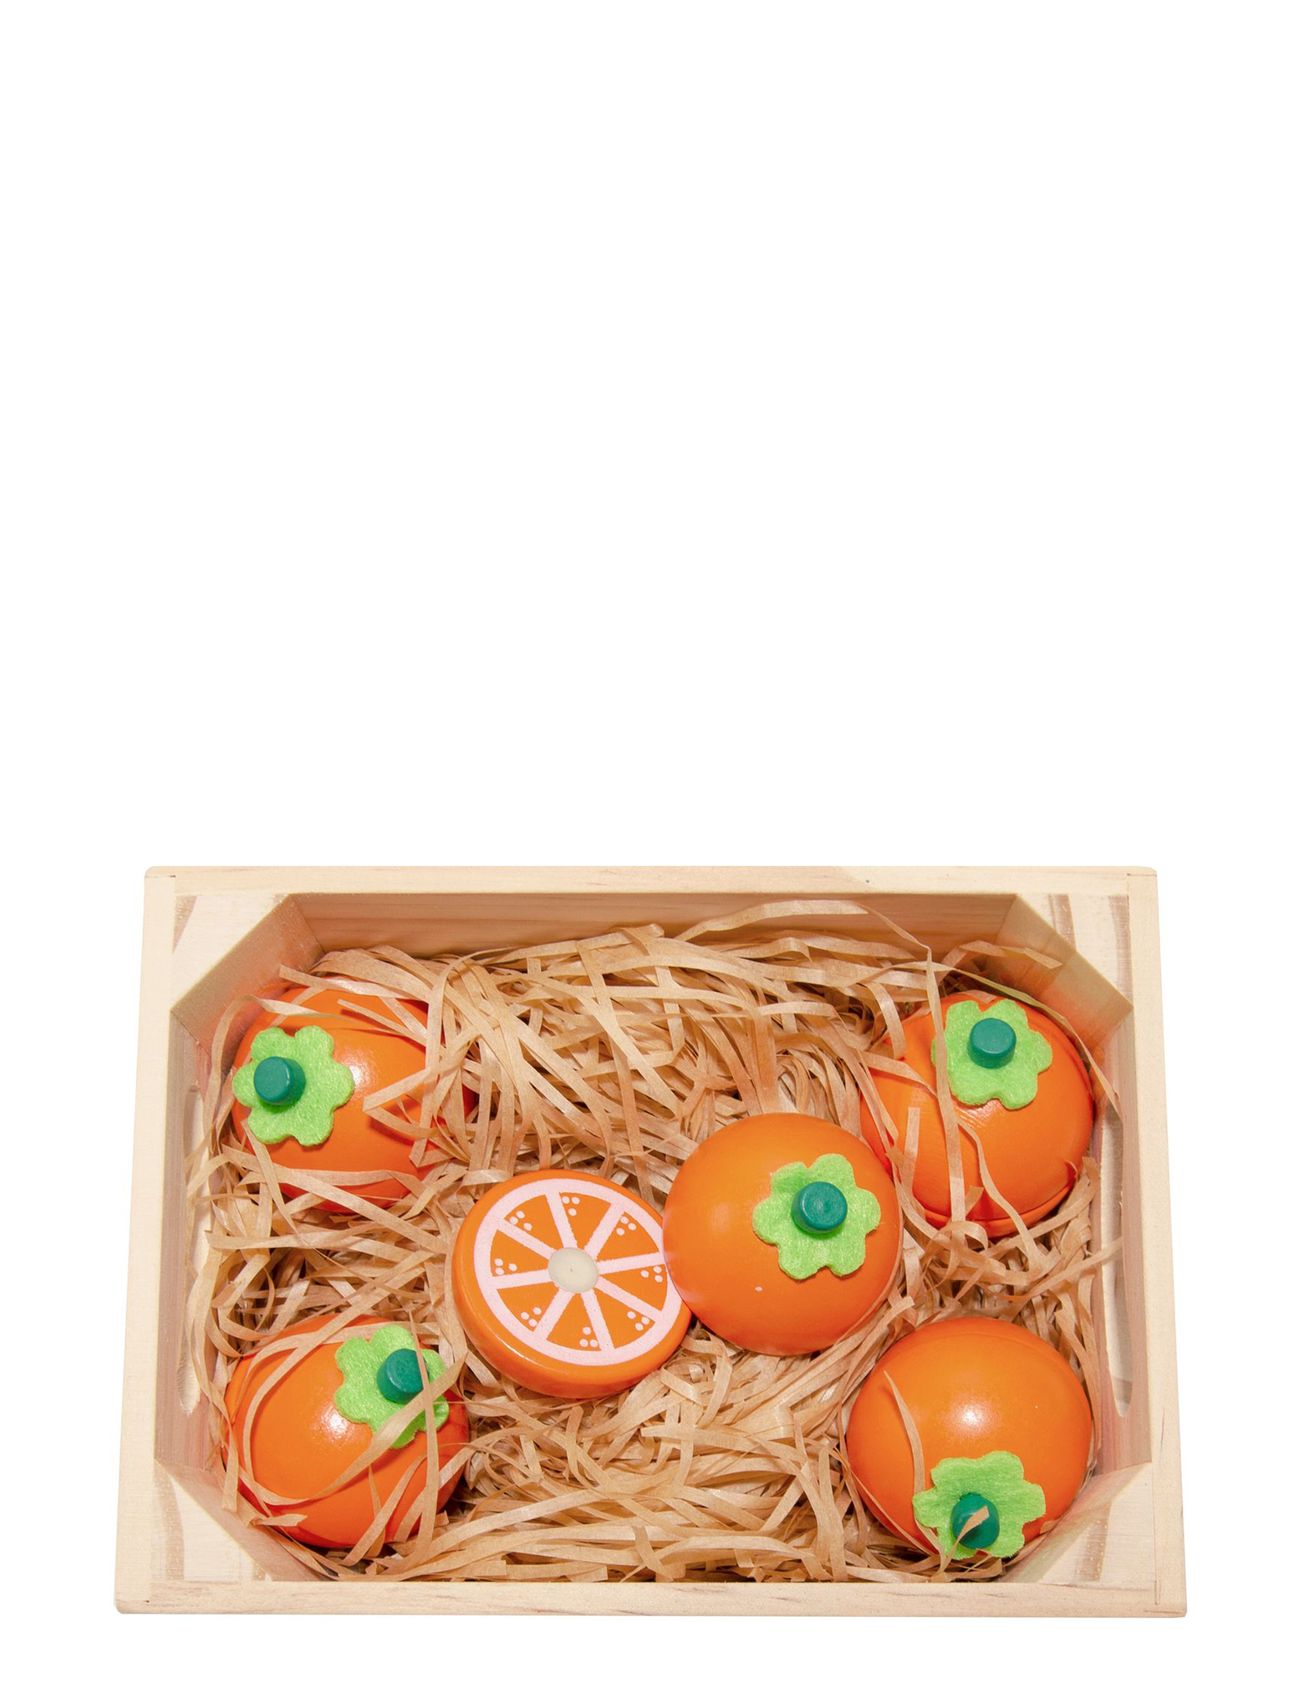 5 Oranges With Magnet In A Box Toys Toy Kitchen & Accessories Toy Food & Cakes Orange Magni Toys